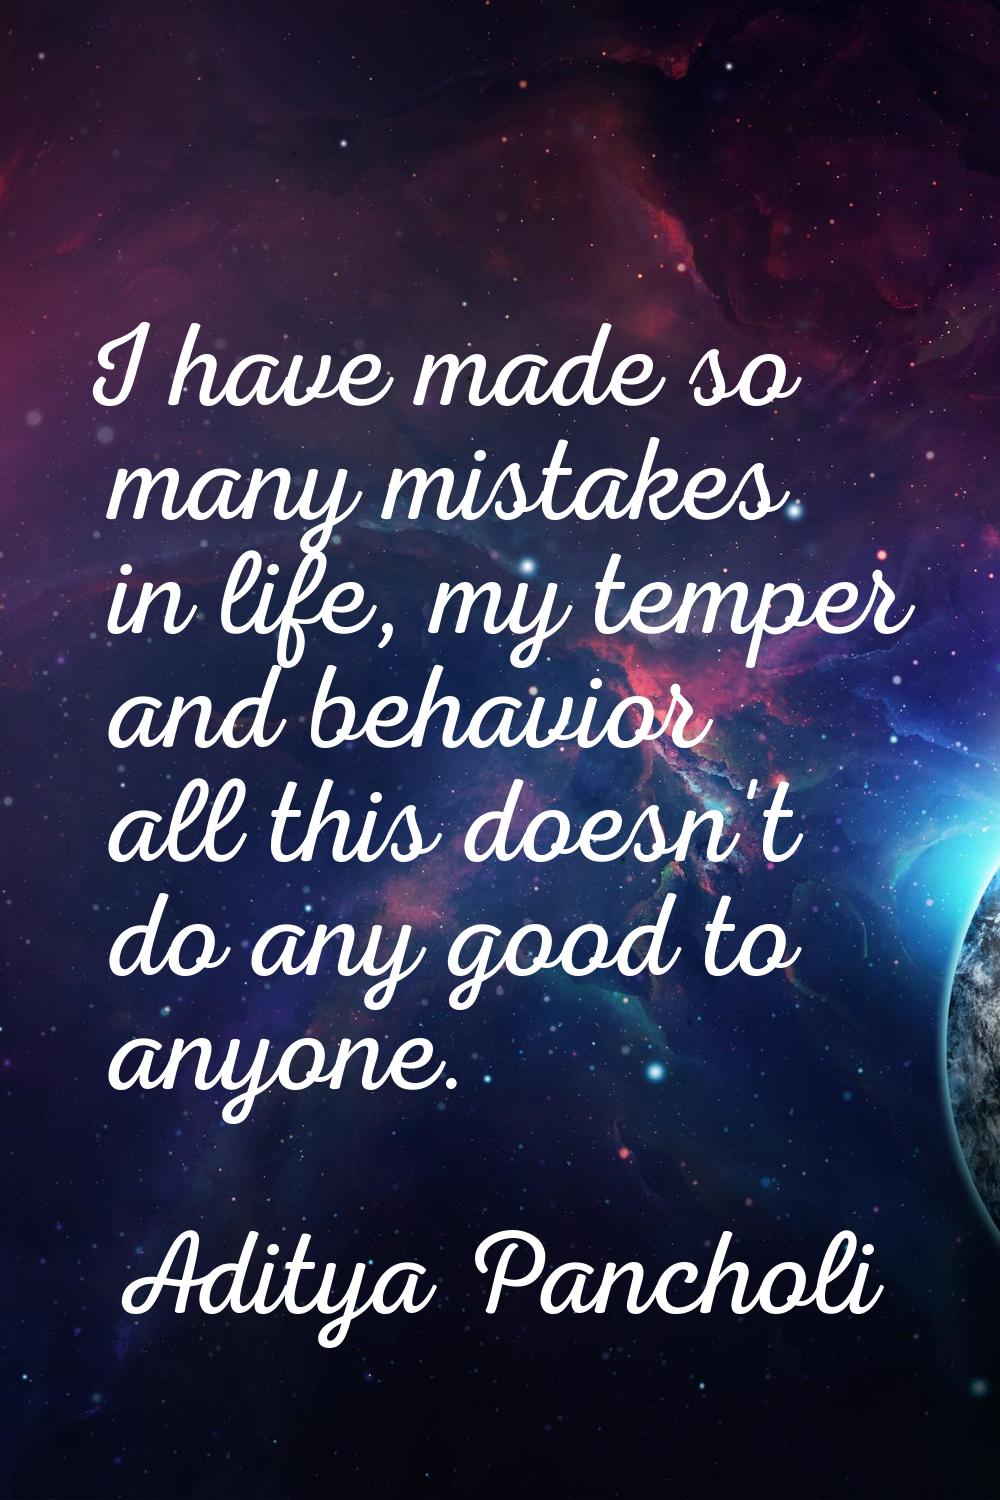 I have made so many mistakes in life, my temper and behavior all this doesn't do any good to anyone